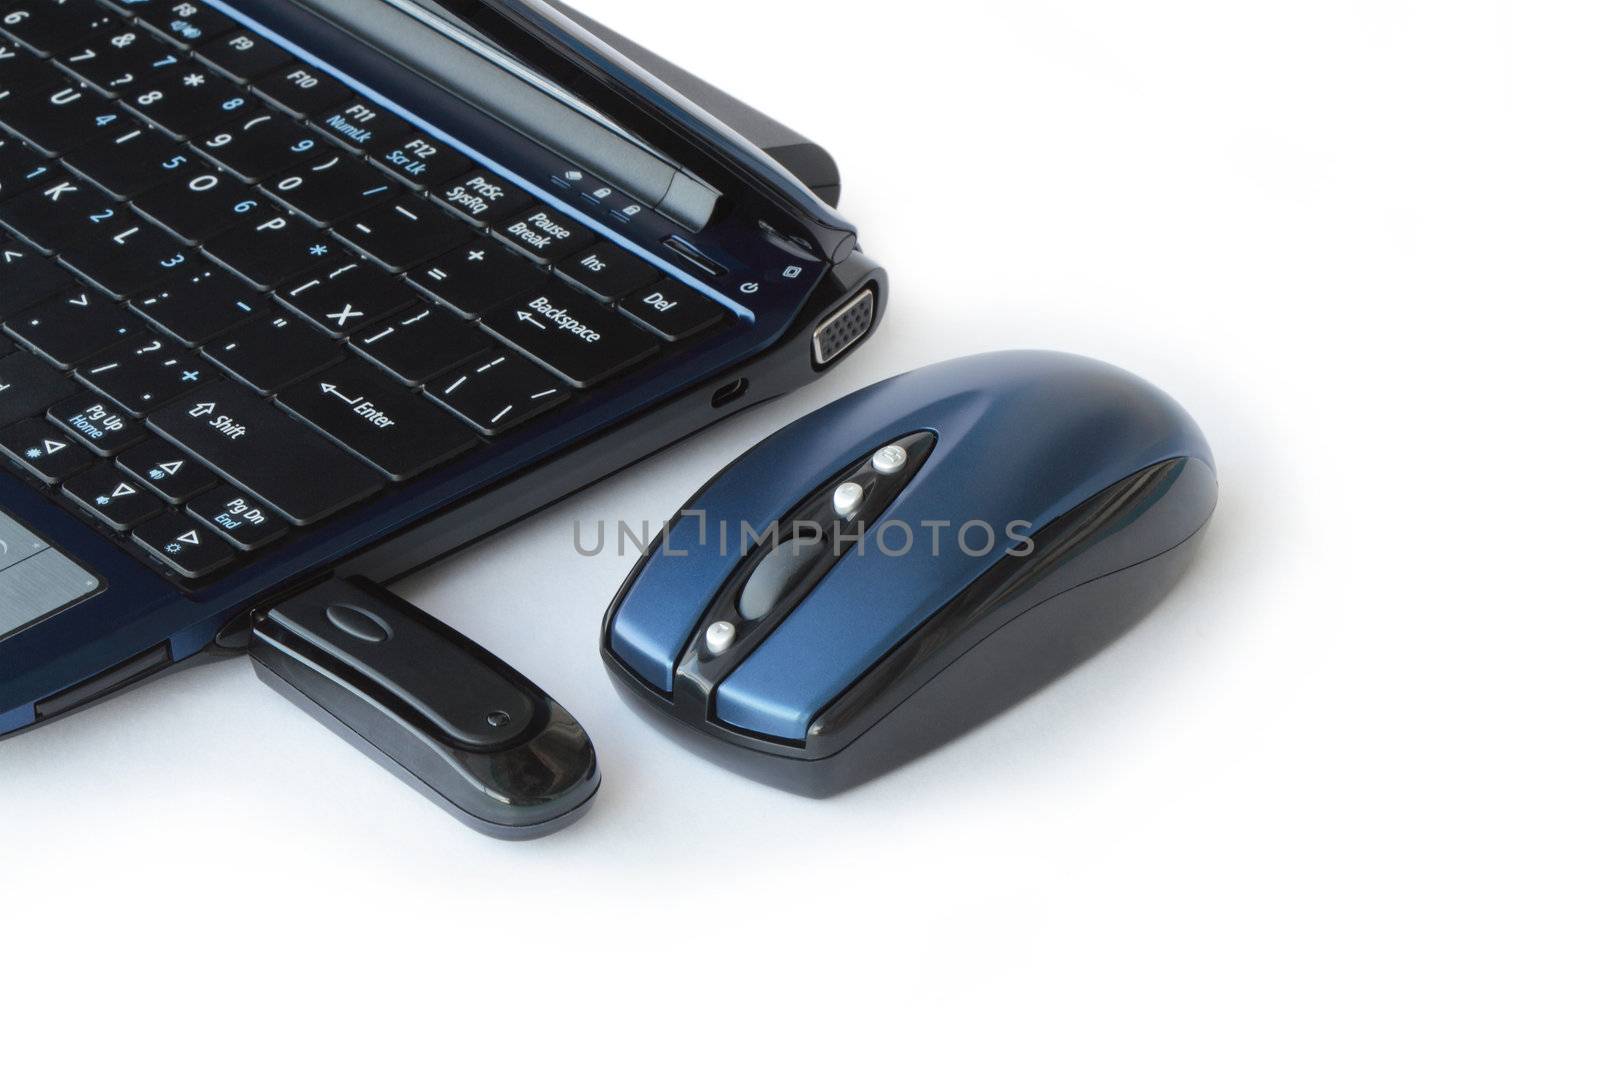 Wireless computer mouse lying near laptop isolated on white background